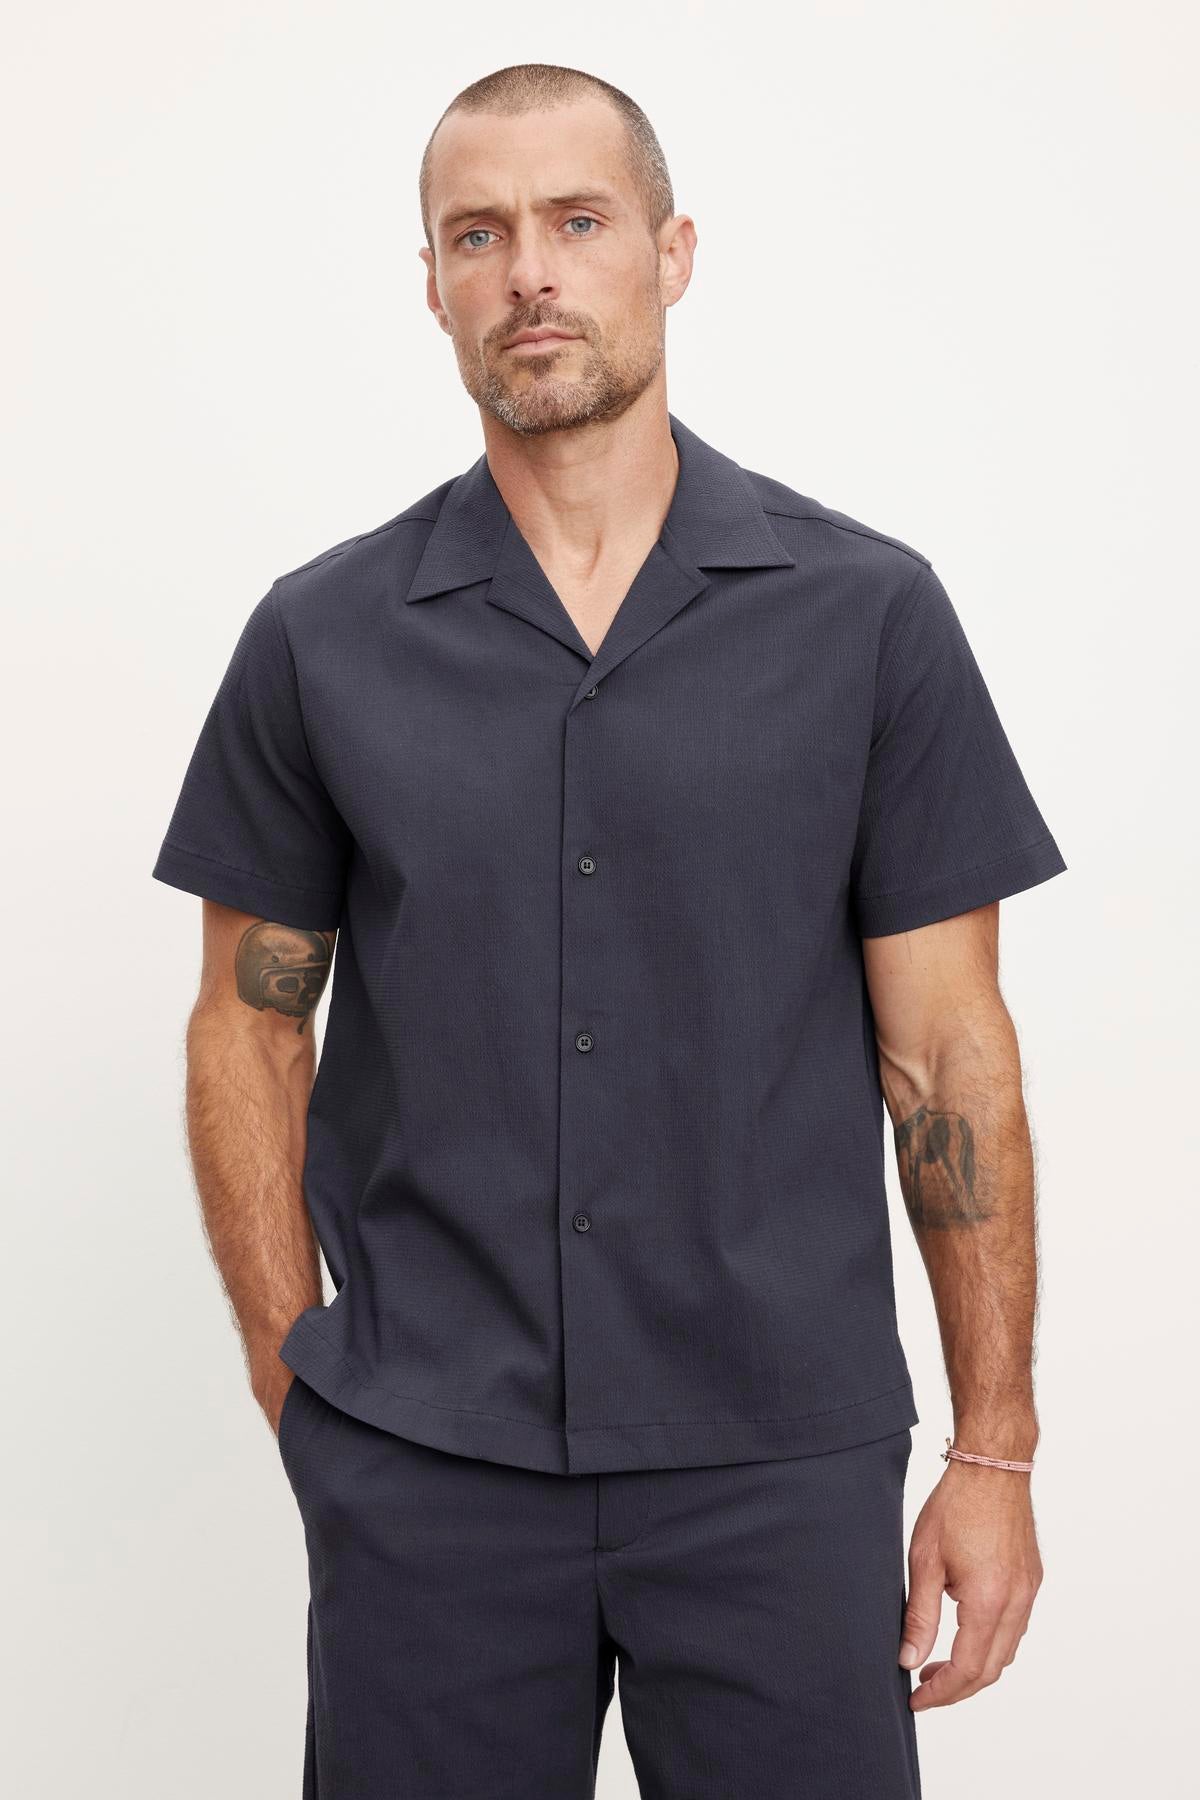 A man with a neutral expression wearing a dark grey relaxed fit short-sleeved Velvet by Graham & Spencer FRANK BUTTON-UP SHIRT and matching pants, showing visible tattoos on both arms.-36890699595969